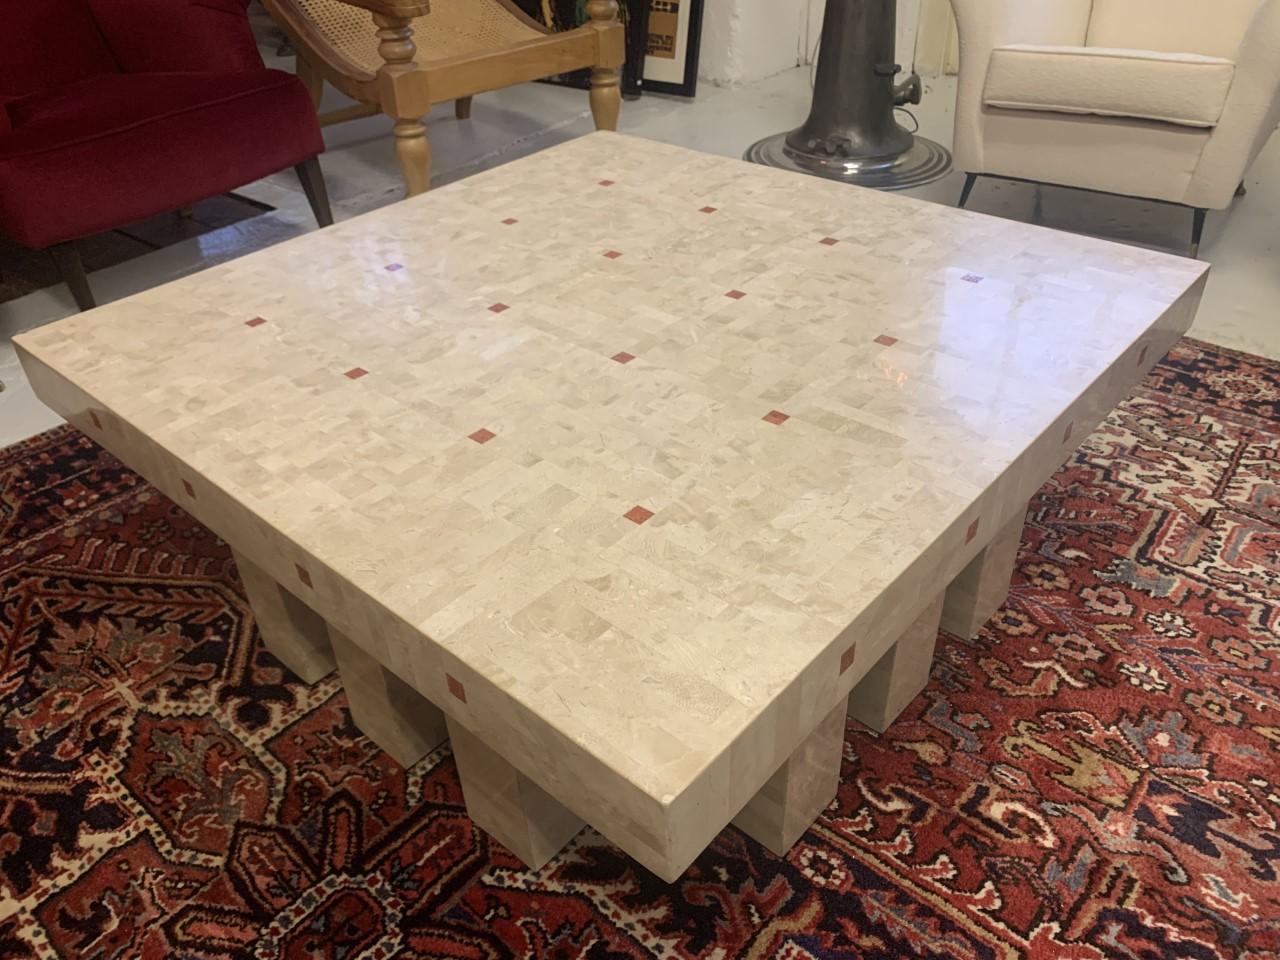 Large Brutalist  marble coffee table in the style of designer Ado Chale. 
A contemporary piece that will compliment many interior styles. Made with Marble stone on a solid hardwood frame with use of mosaic technique. The 12 legs give it a very